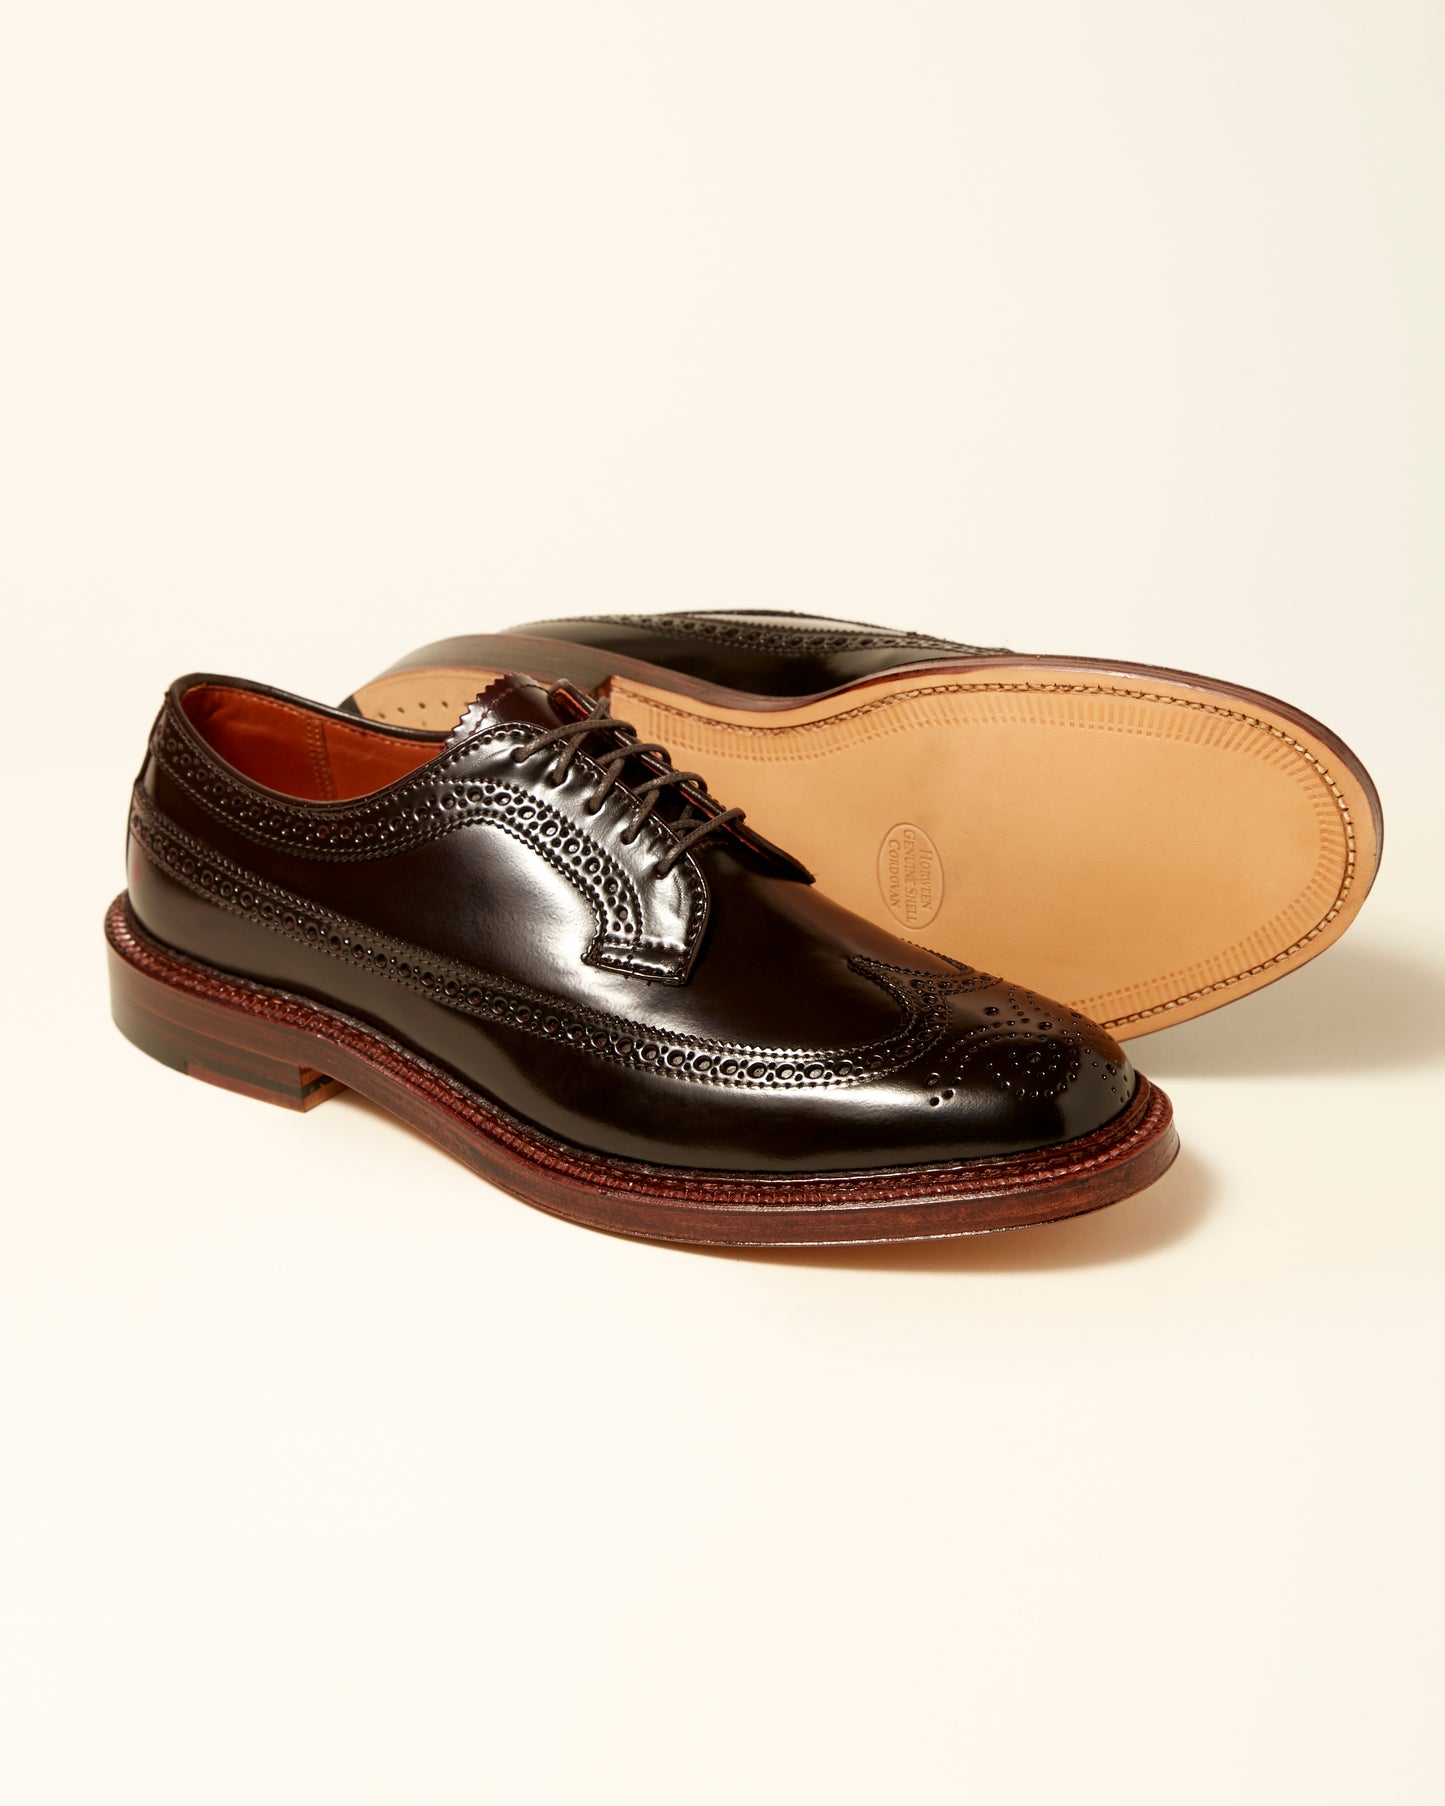 975A Color 8 Shell Cordovan Longwing Blucher